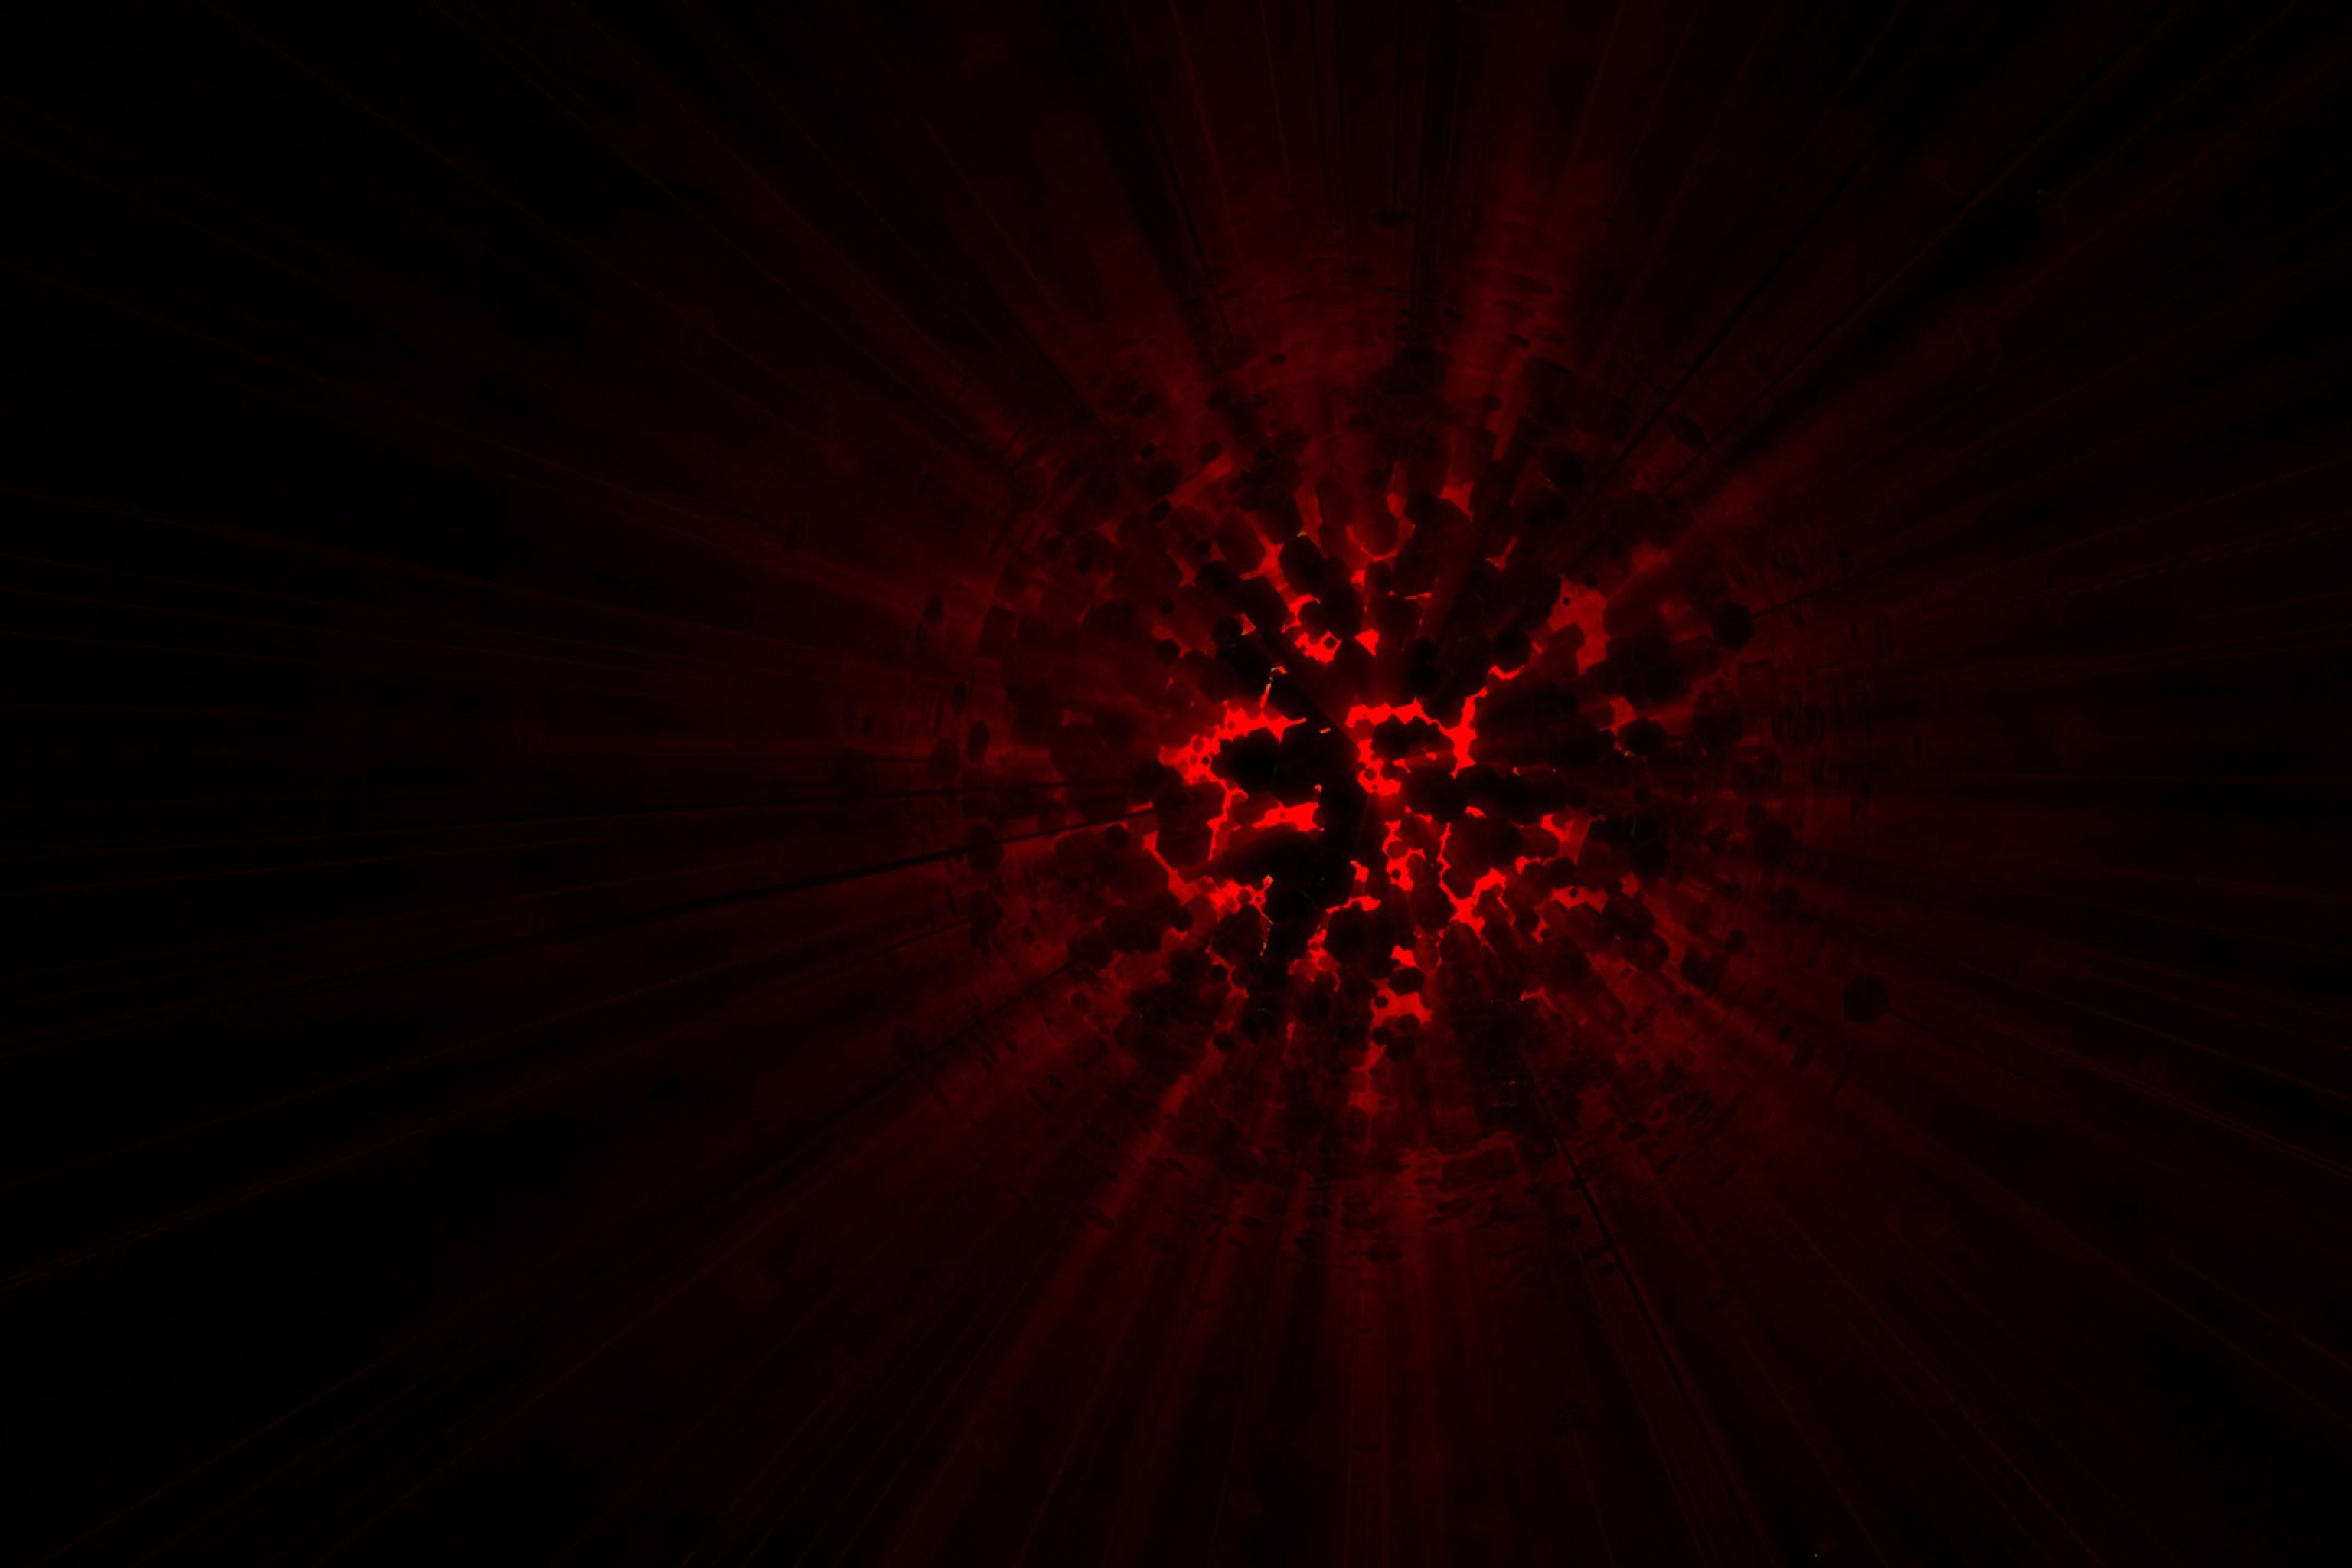 3072x2048 Red Explosion Wallpaper At Dark Wallpapers